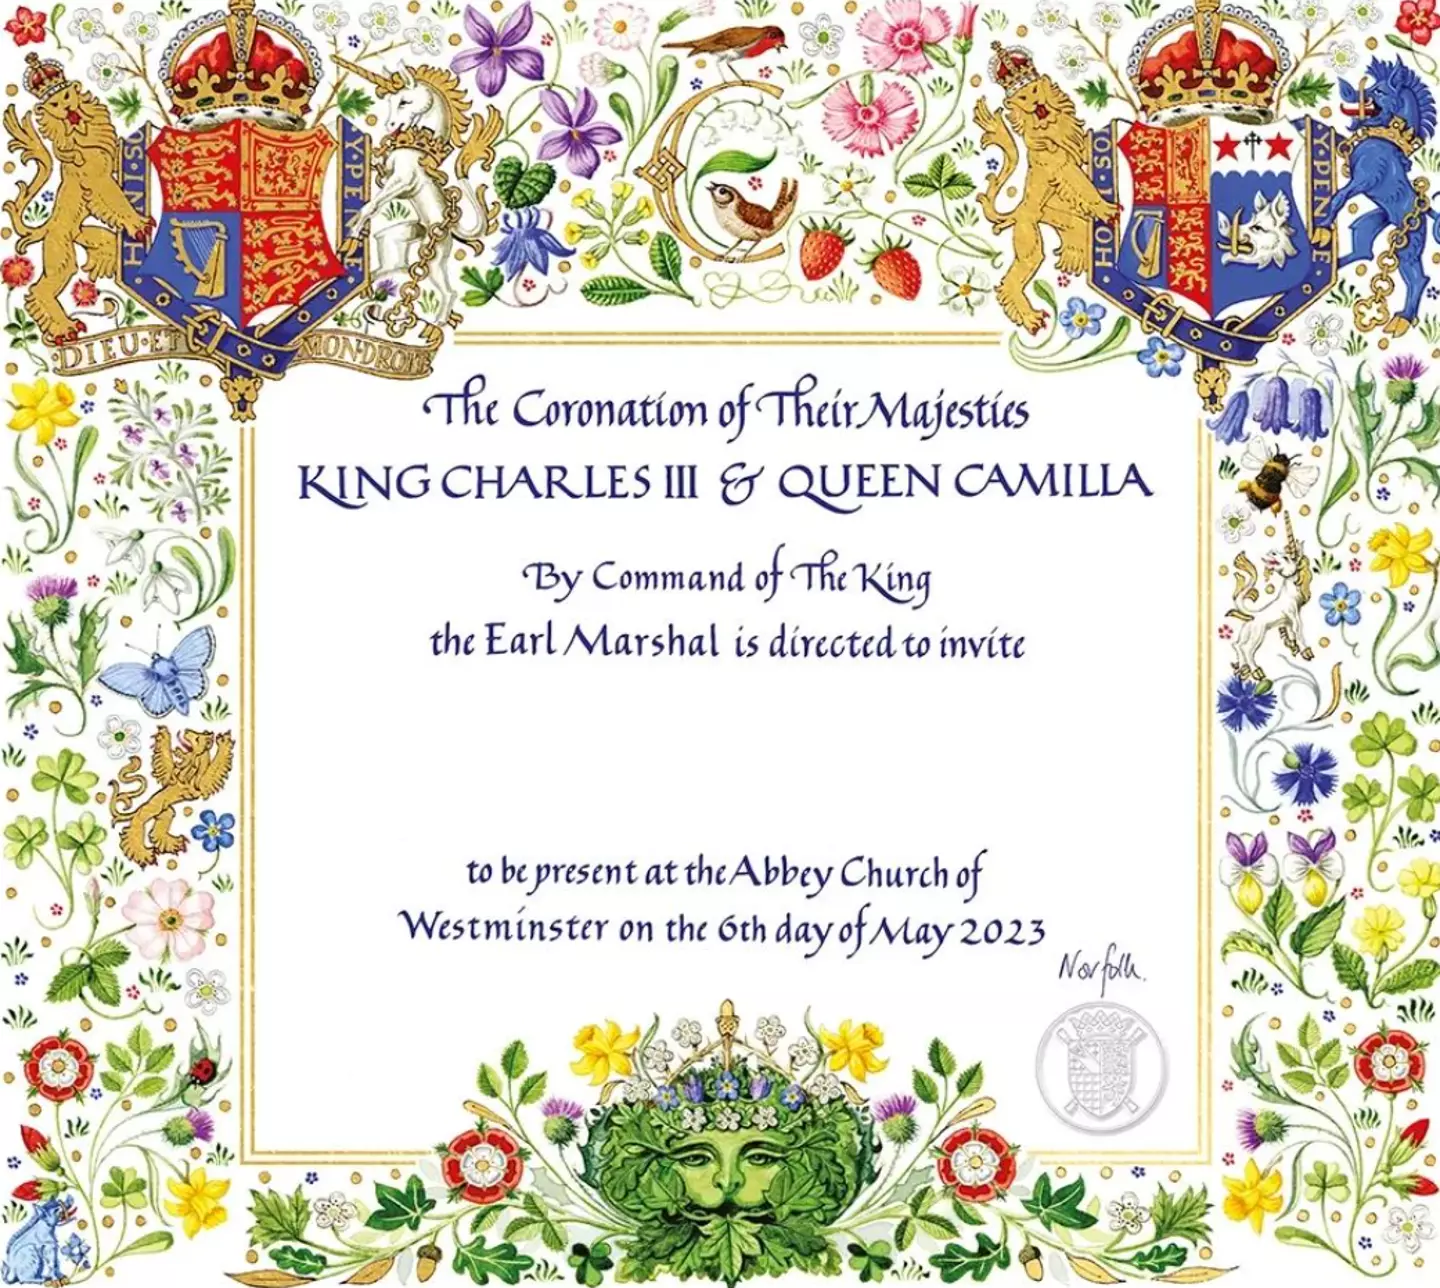 Charles officially becomes King on 6 May.